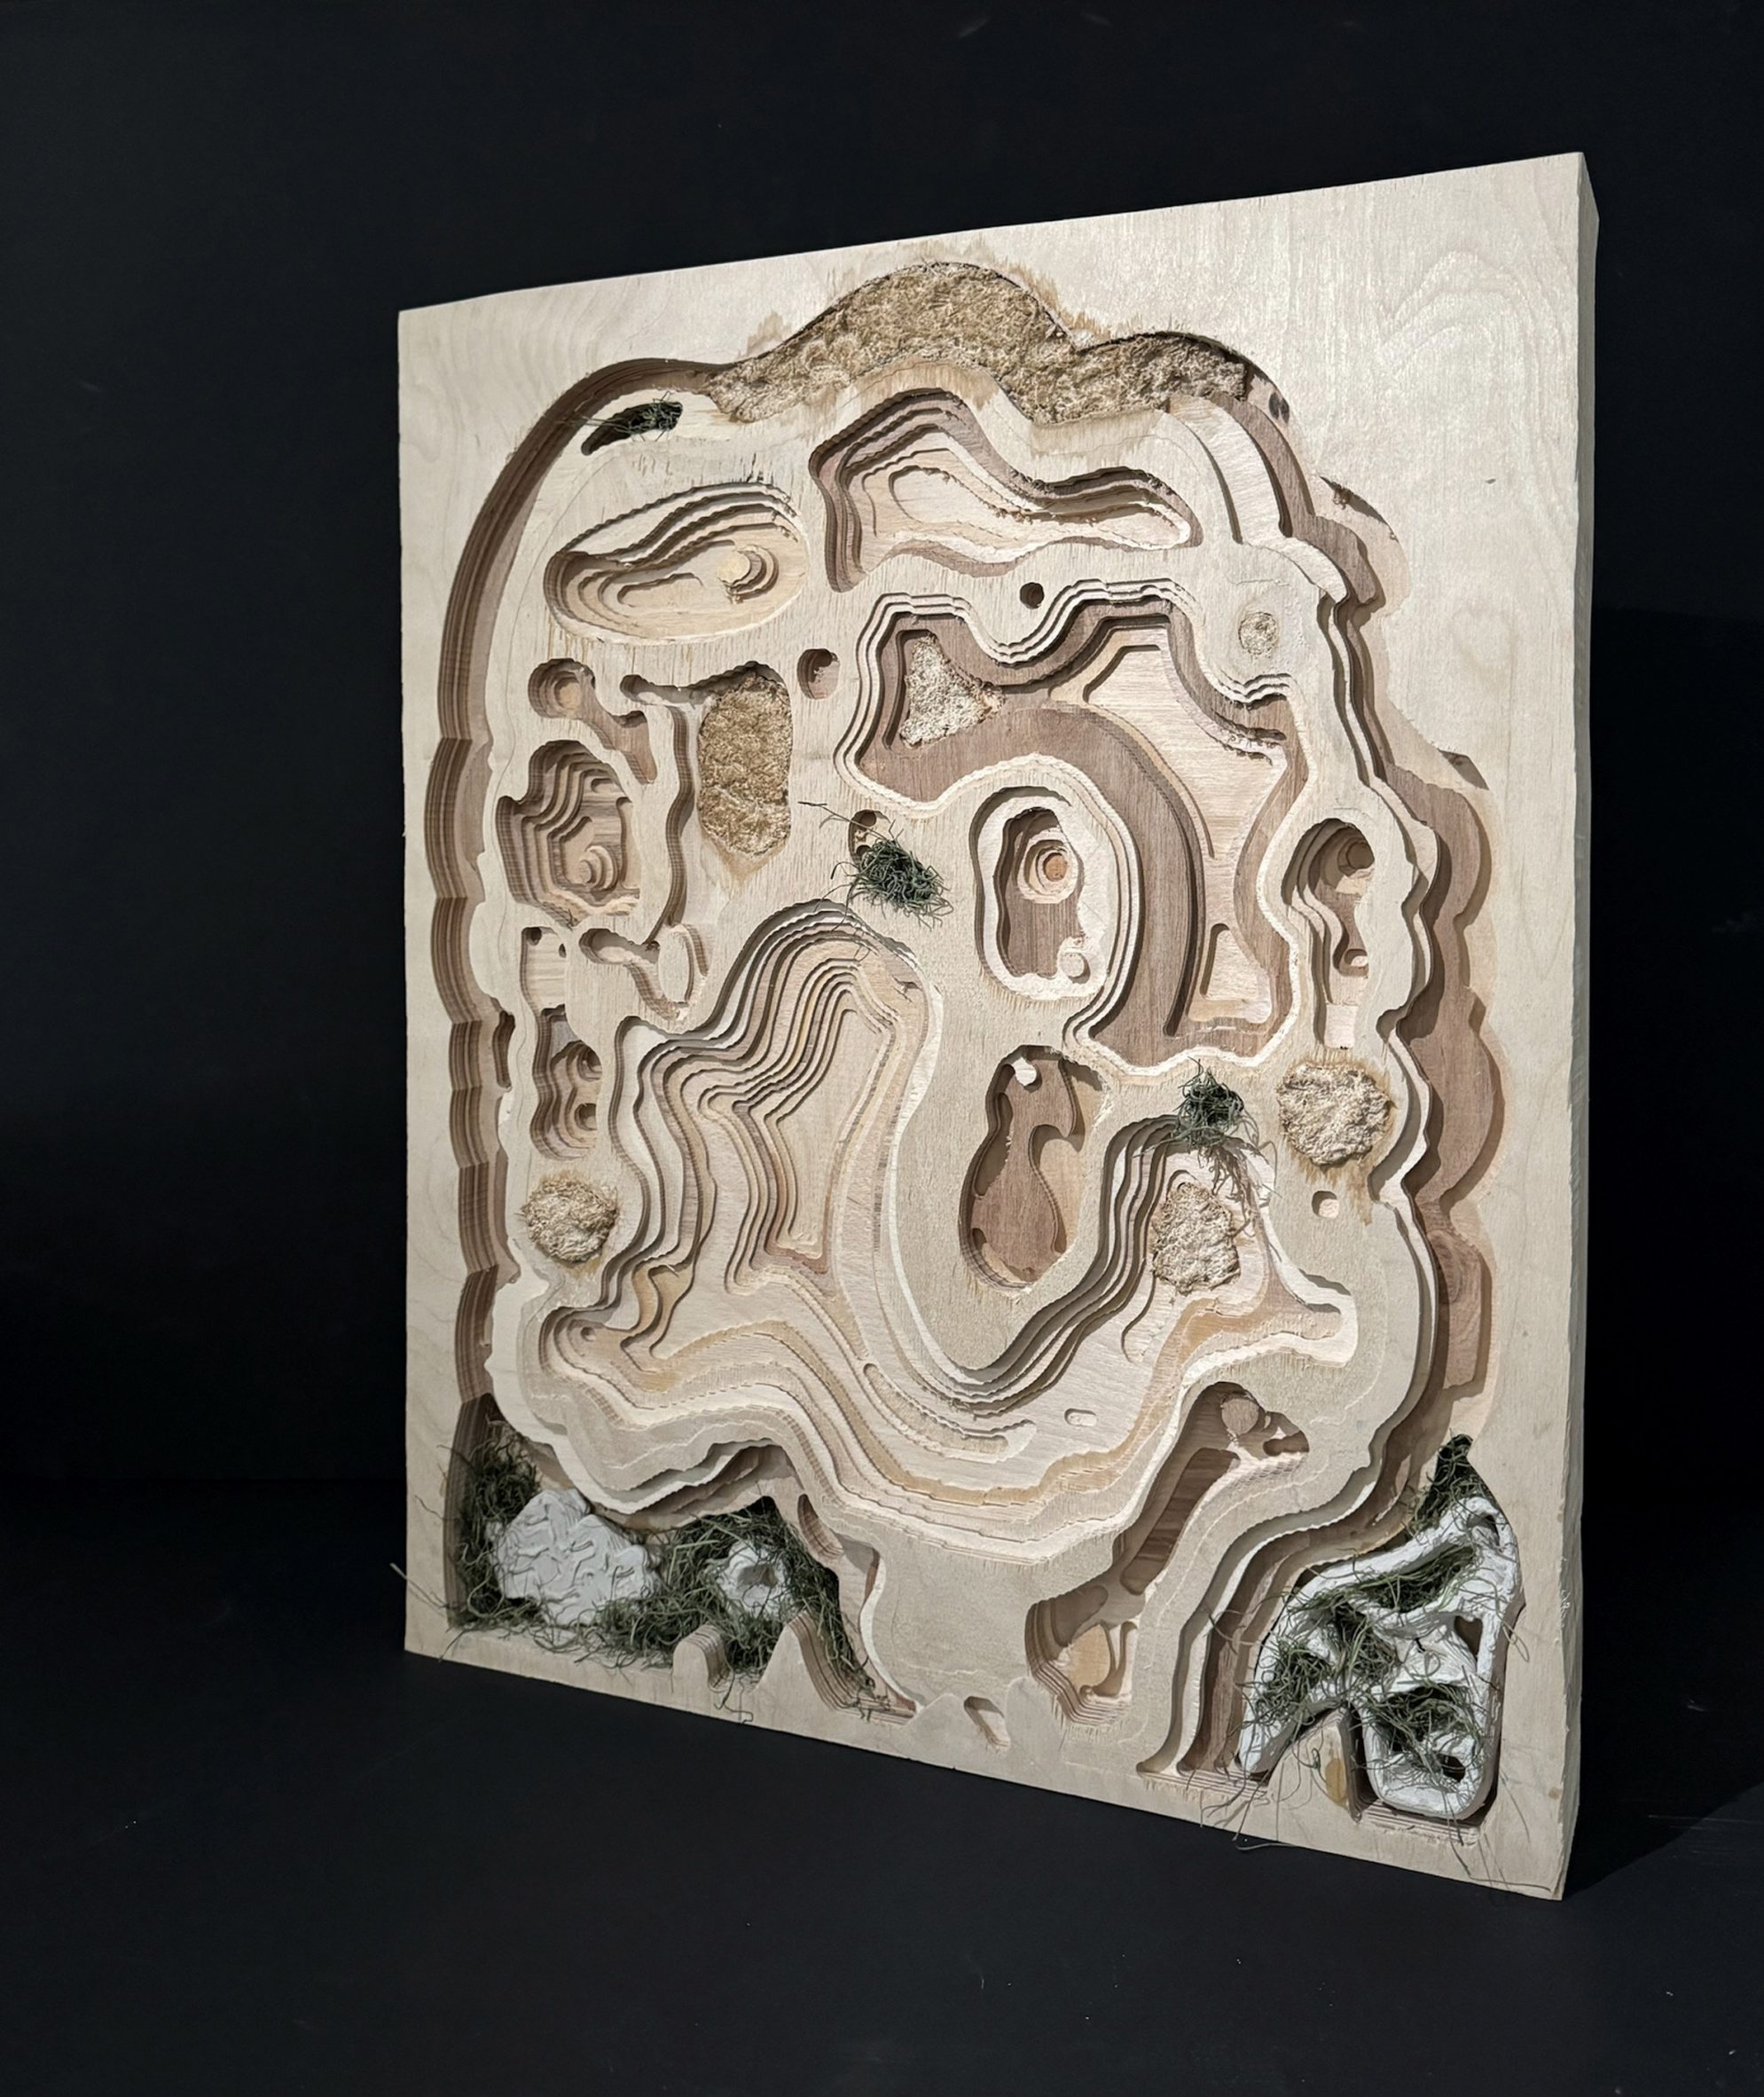 A panel made from wood and clay